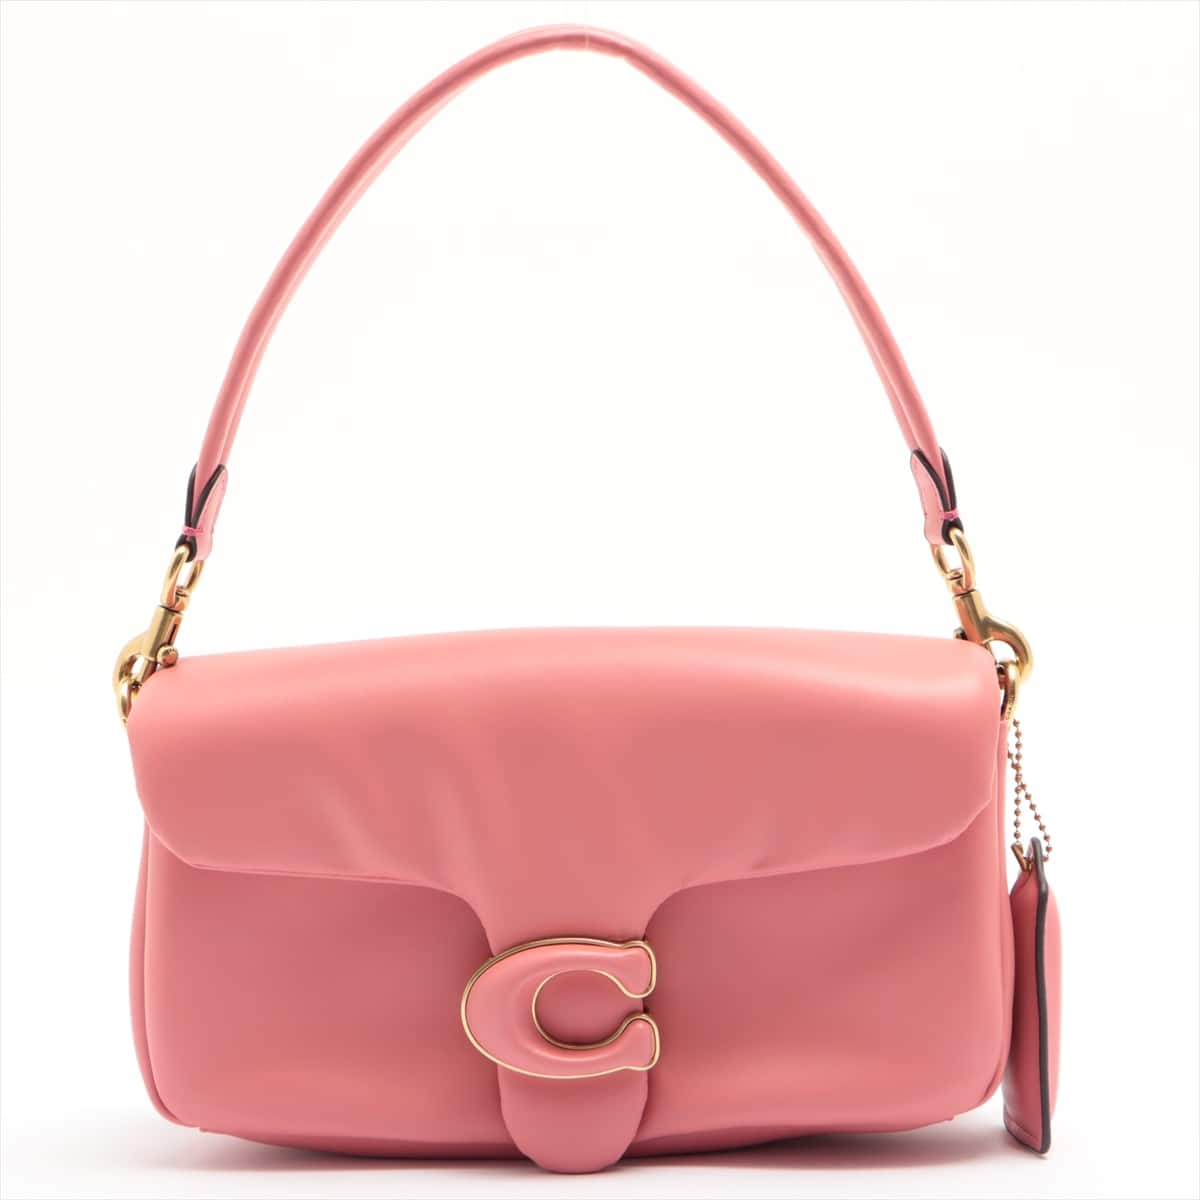 COACH Pillow Tabby 26 Nappa leather Shoulder bag Pink C0772